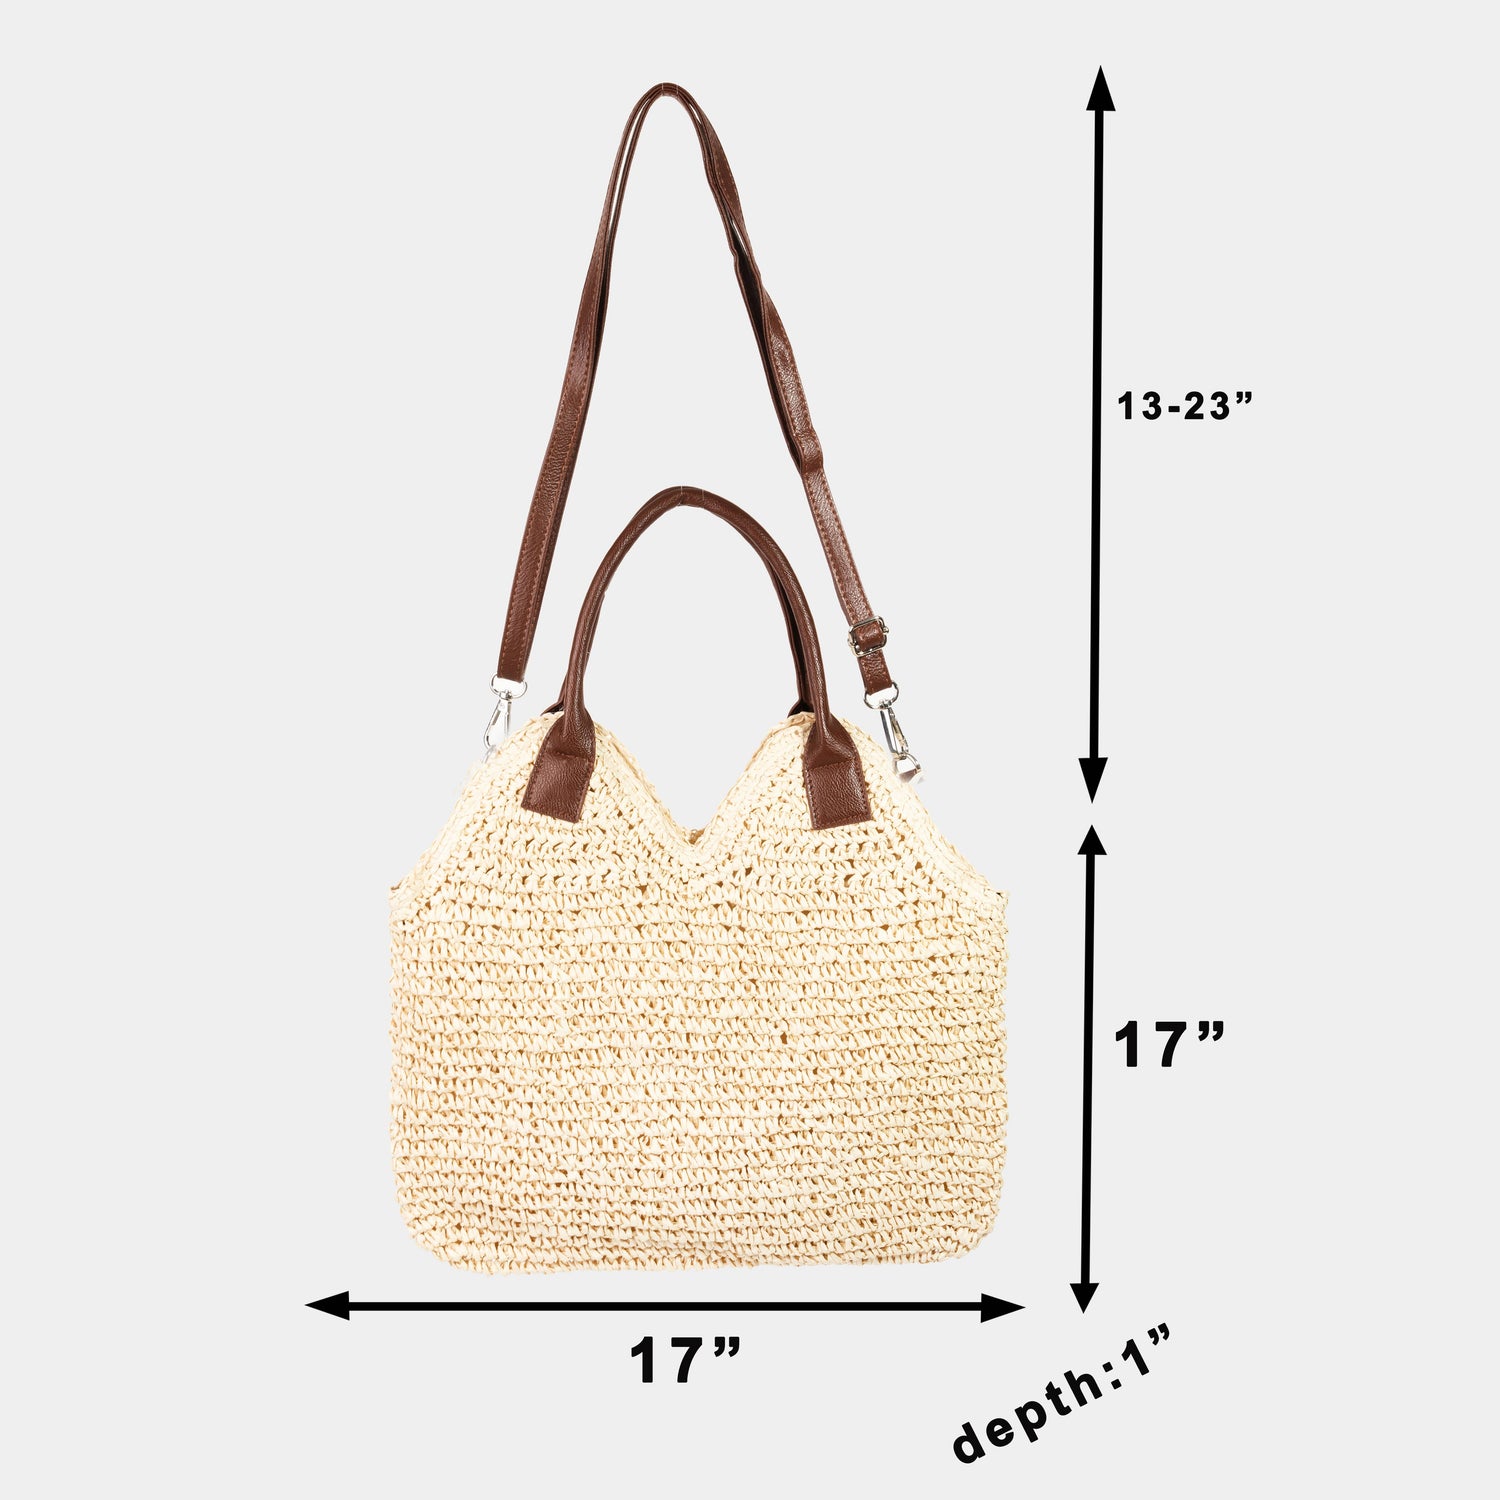 Collections by Fame Accessories - Faux Leather Strap Straw Knit Shoulder Bag